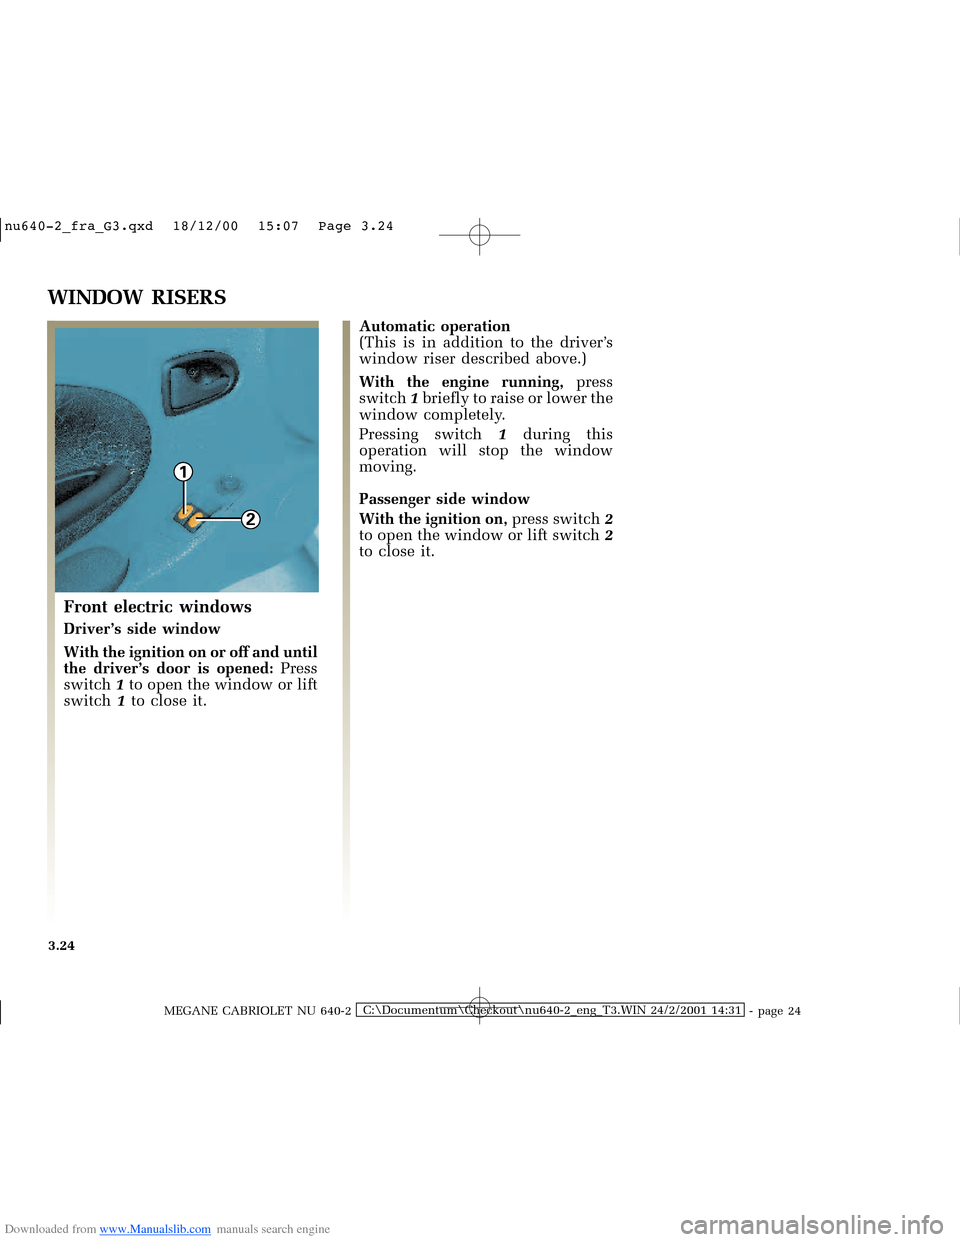 RENAULT MEGANE 2000 X64 / 1.G Owners Manual Downloaded from www.Manualslib.com manuals search engine 1
2
�Q�X������B�I�U�D�B�*���T�[�G� � ��������� � ������ � �3�D�J�H� ����
MEGANE CABRIOLET NU 640-2C:\Documentum\